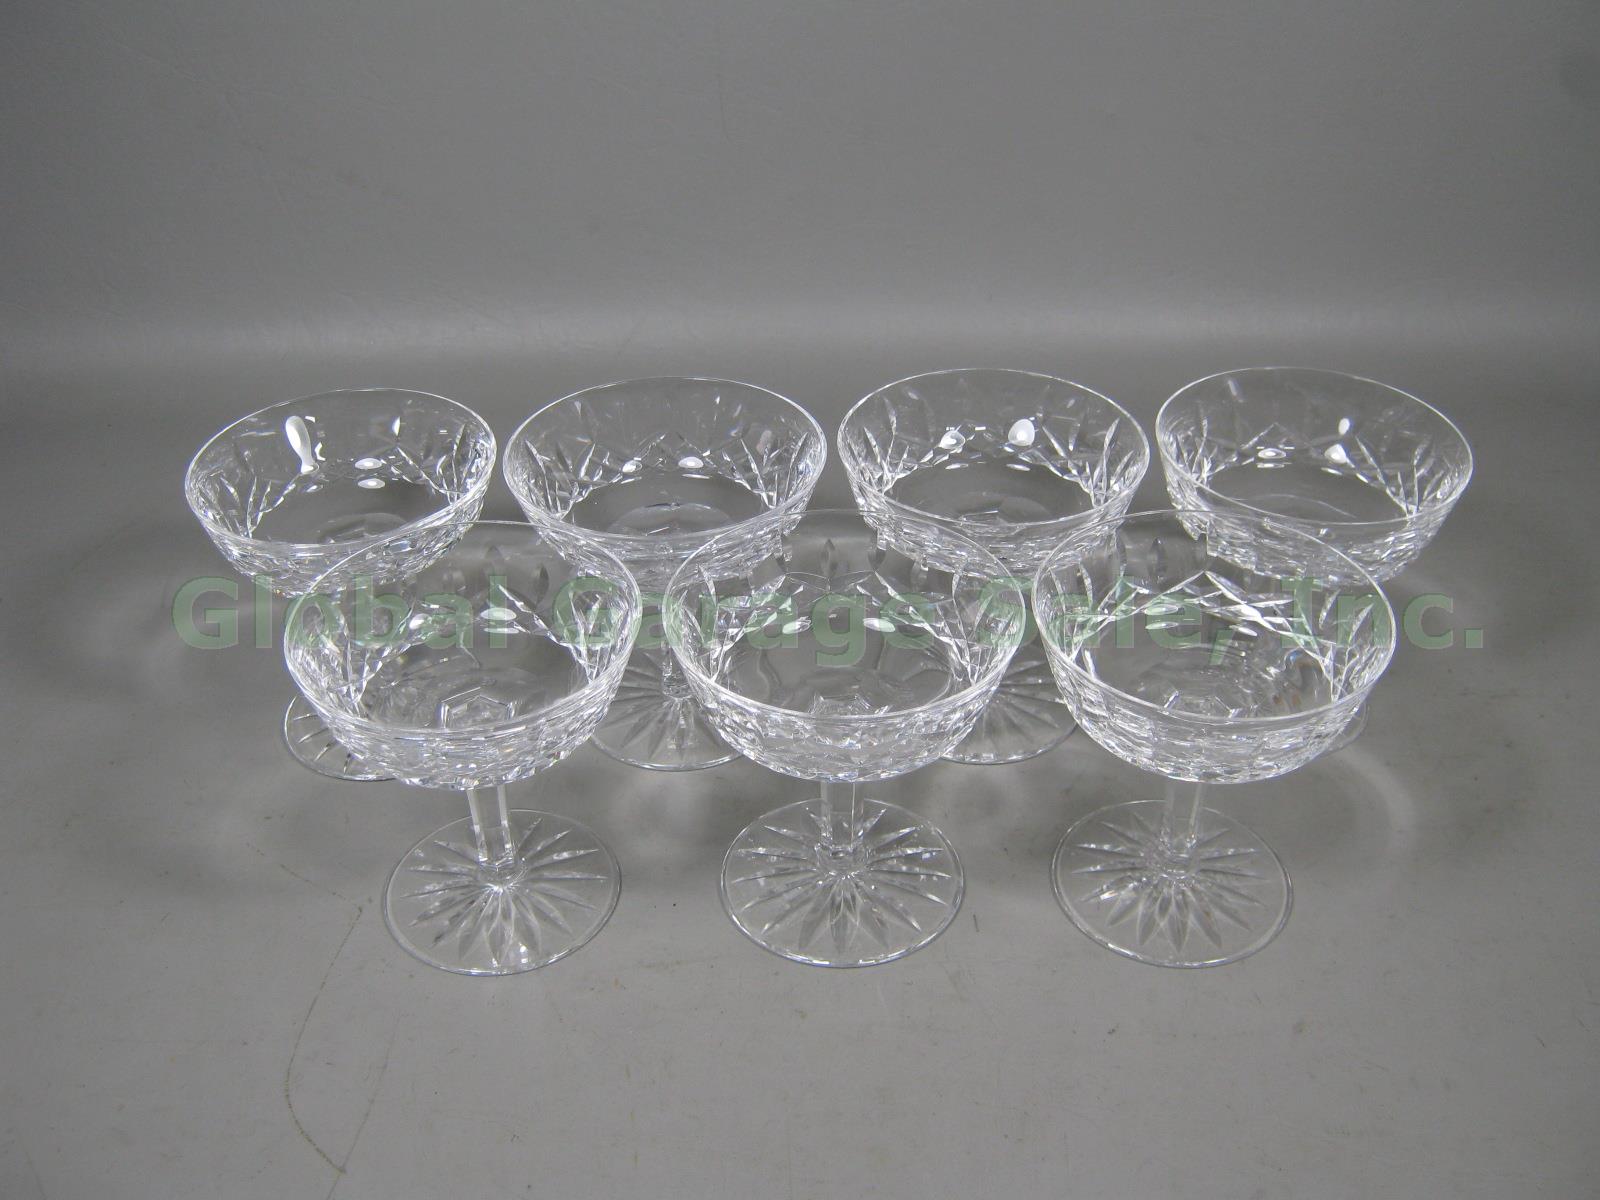 7 Waterford Crystal Lismore Sherbet Champagne Glass 4-1/8" One Owner Bought New